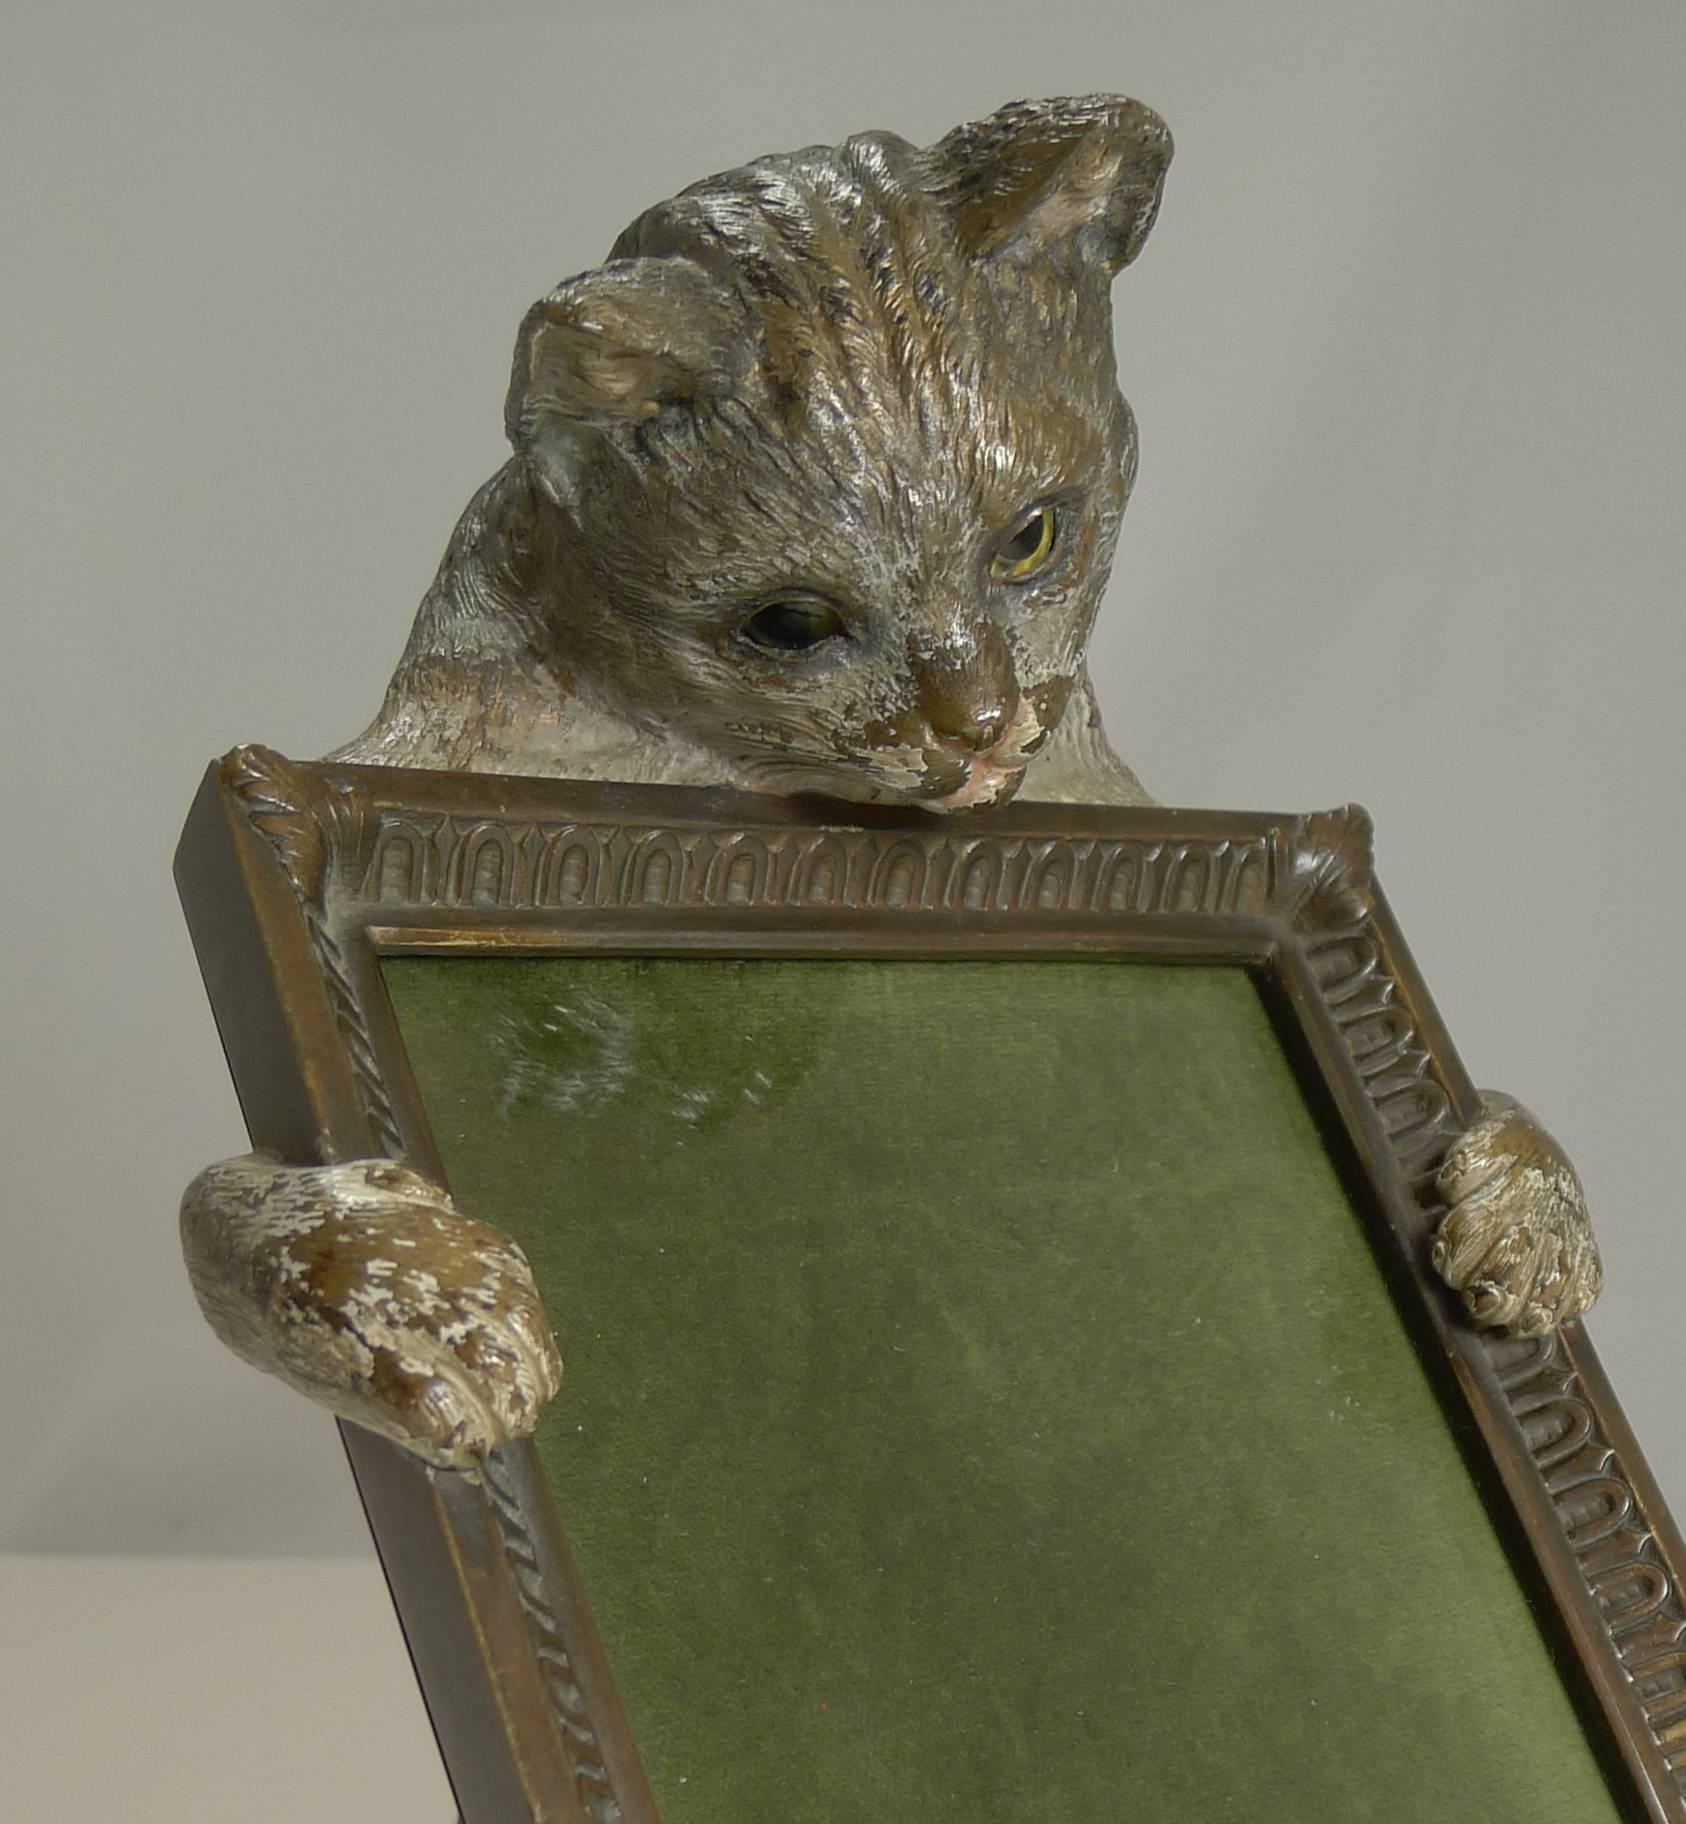 Cold-Painted Very Rare Cold Painted Bronze Novelty Photograph Frame, Cat with Glass Eyes